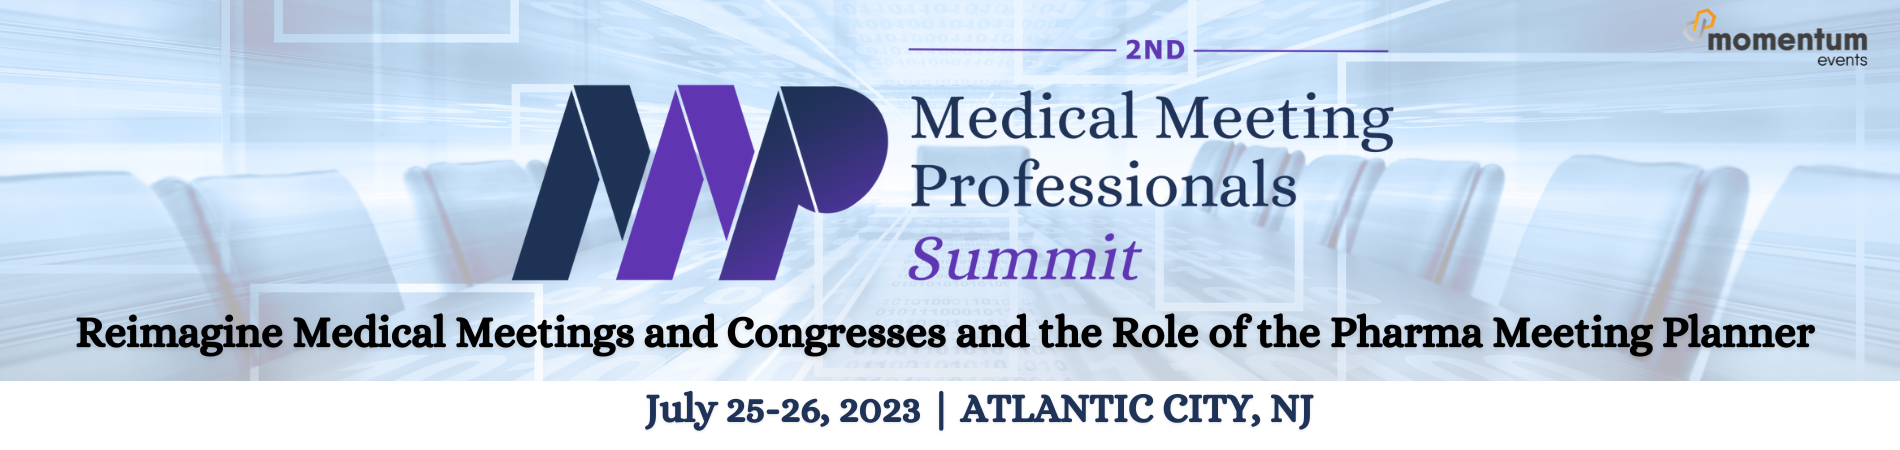 2nd Medical Meeting Professionals Virtual Summit, Reimagine Medical Meetings and Congresses and the Role of the Pharma Meeting Planner, July 25-26, 2023, Atlantic City, NJ